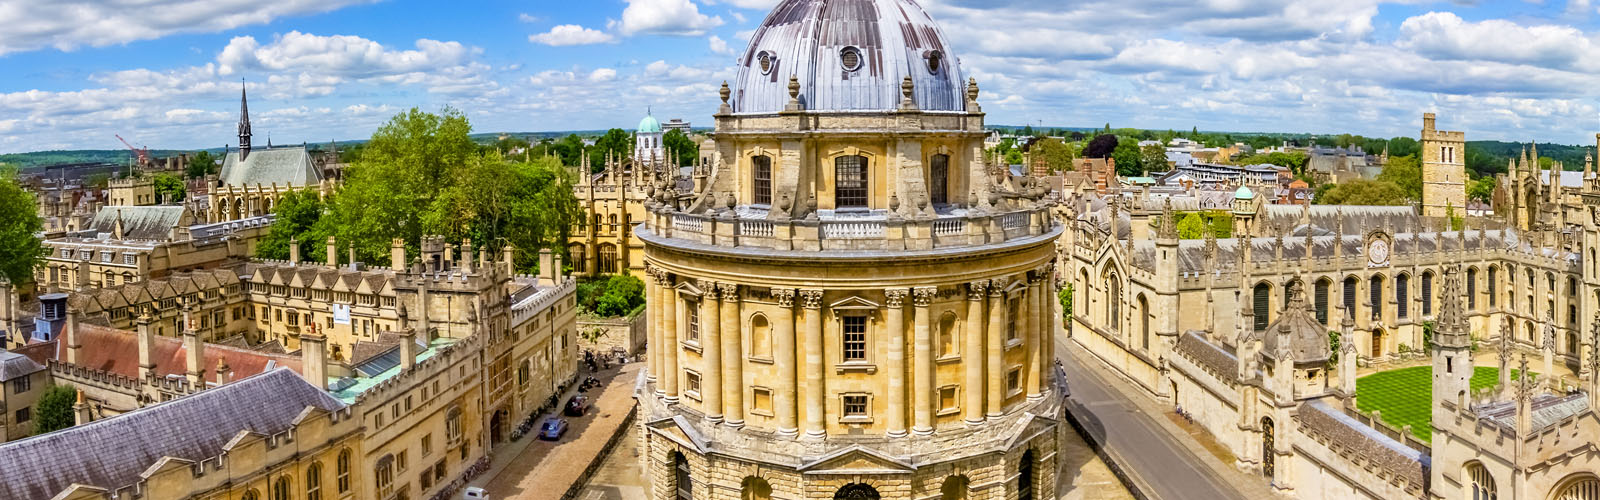 View from a church's tower with the Bodleian Libraryand All Souls College, Oxfordshire.